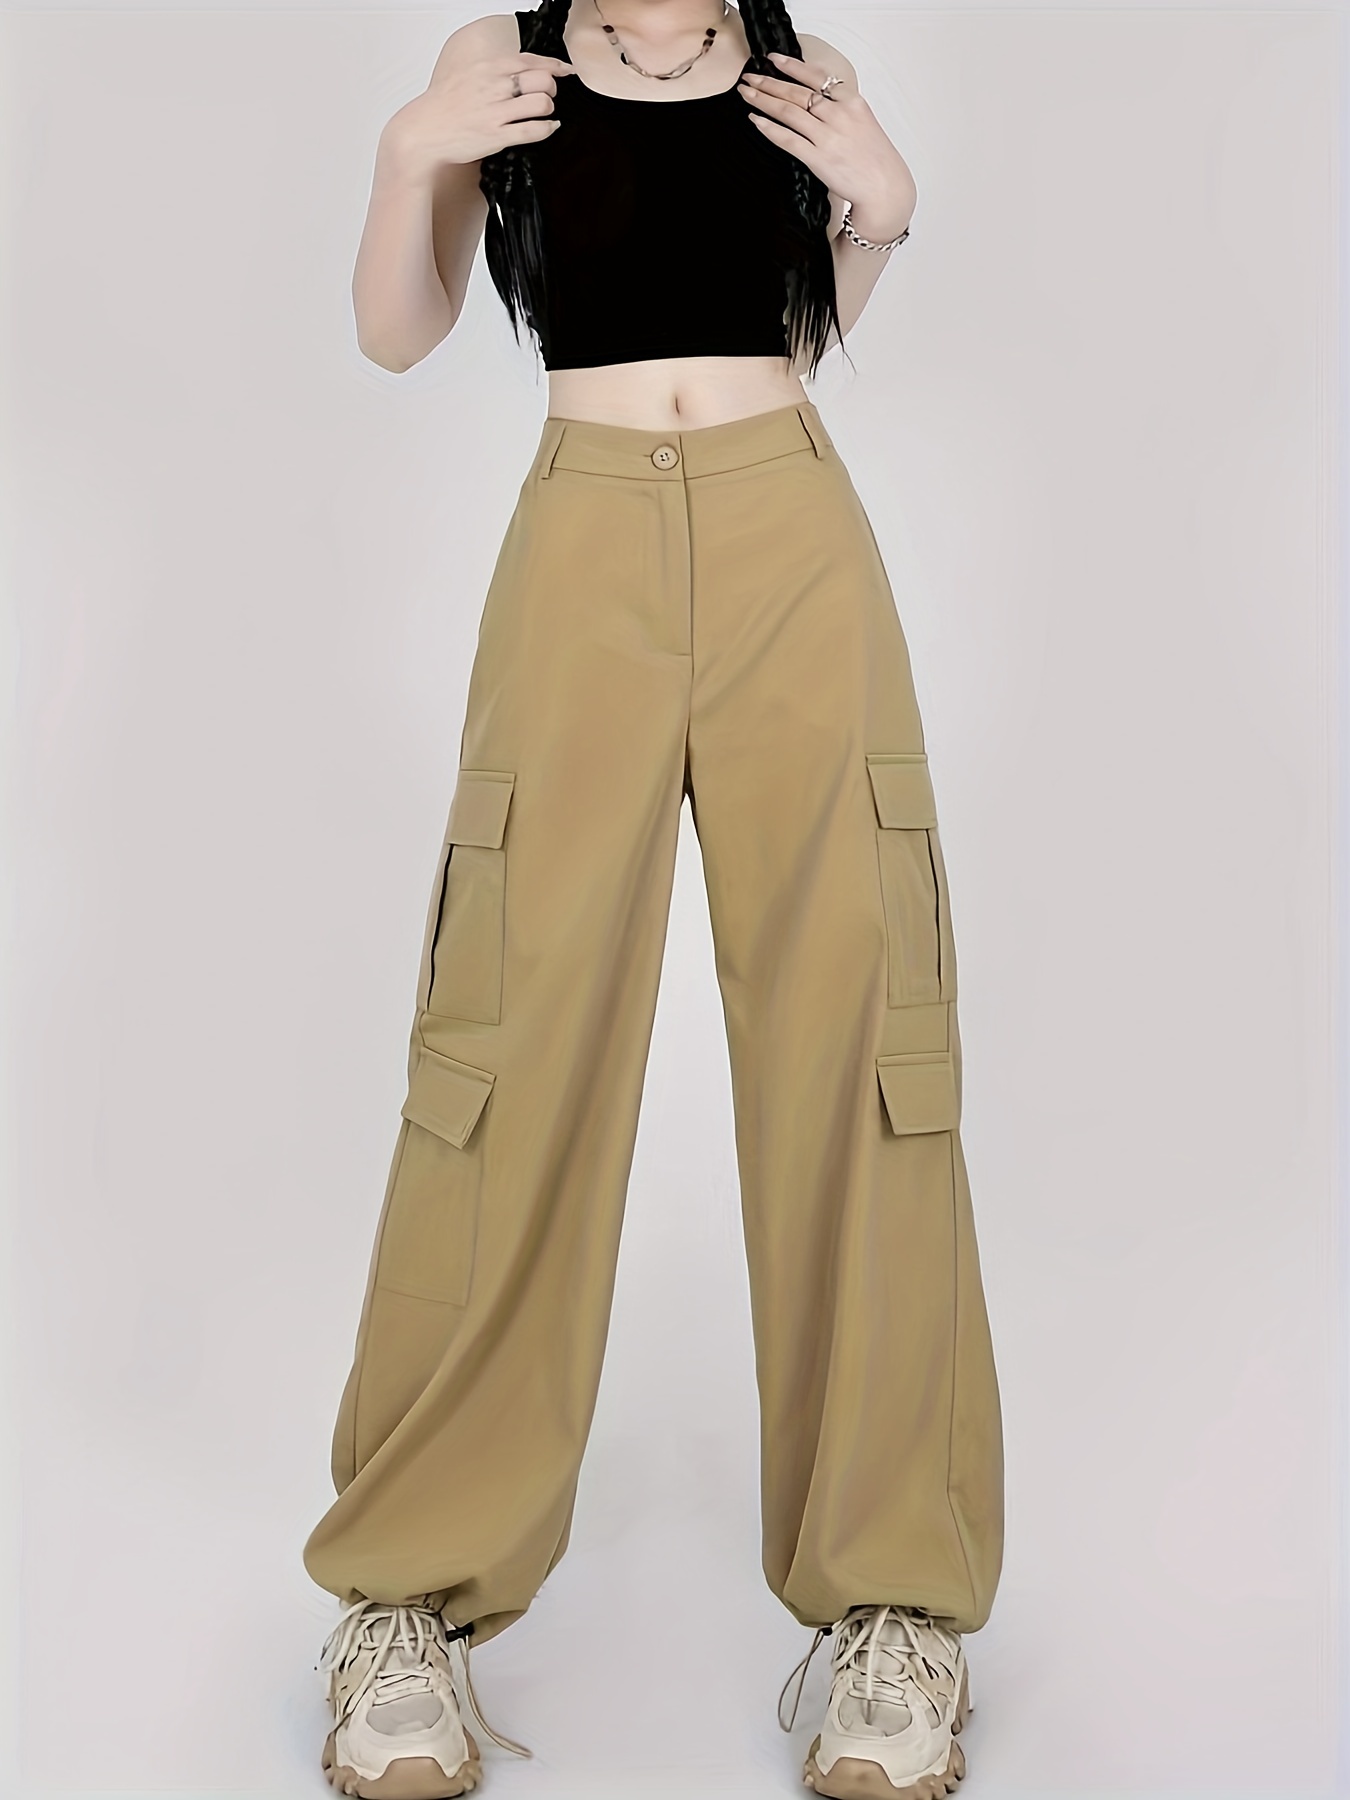 Women's Casual Cargo Pants Button Front Straight Wide Leg Baggy